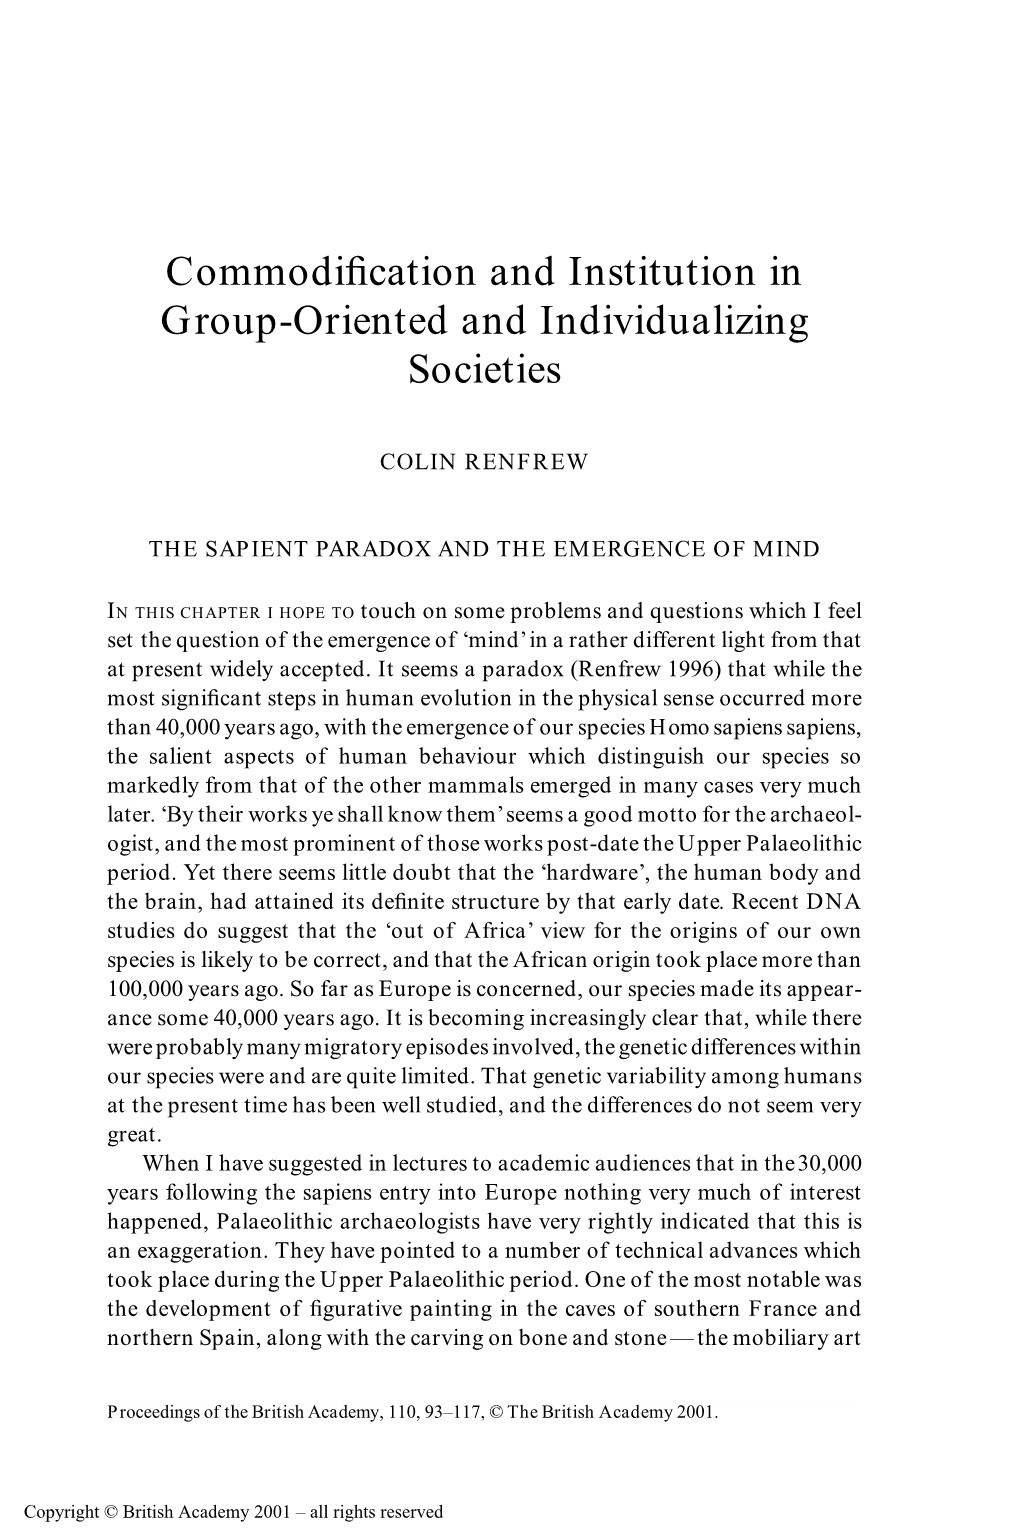 Commodification and Institution in Group-Oriented and Individualizing